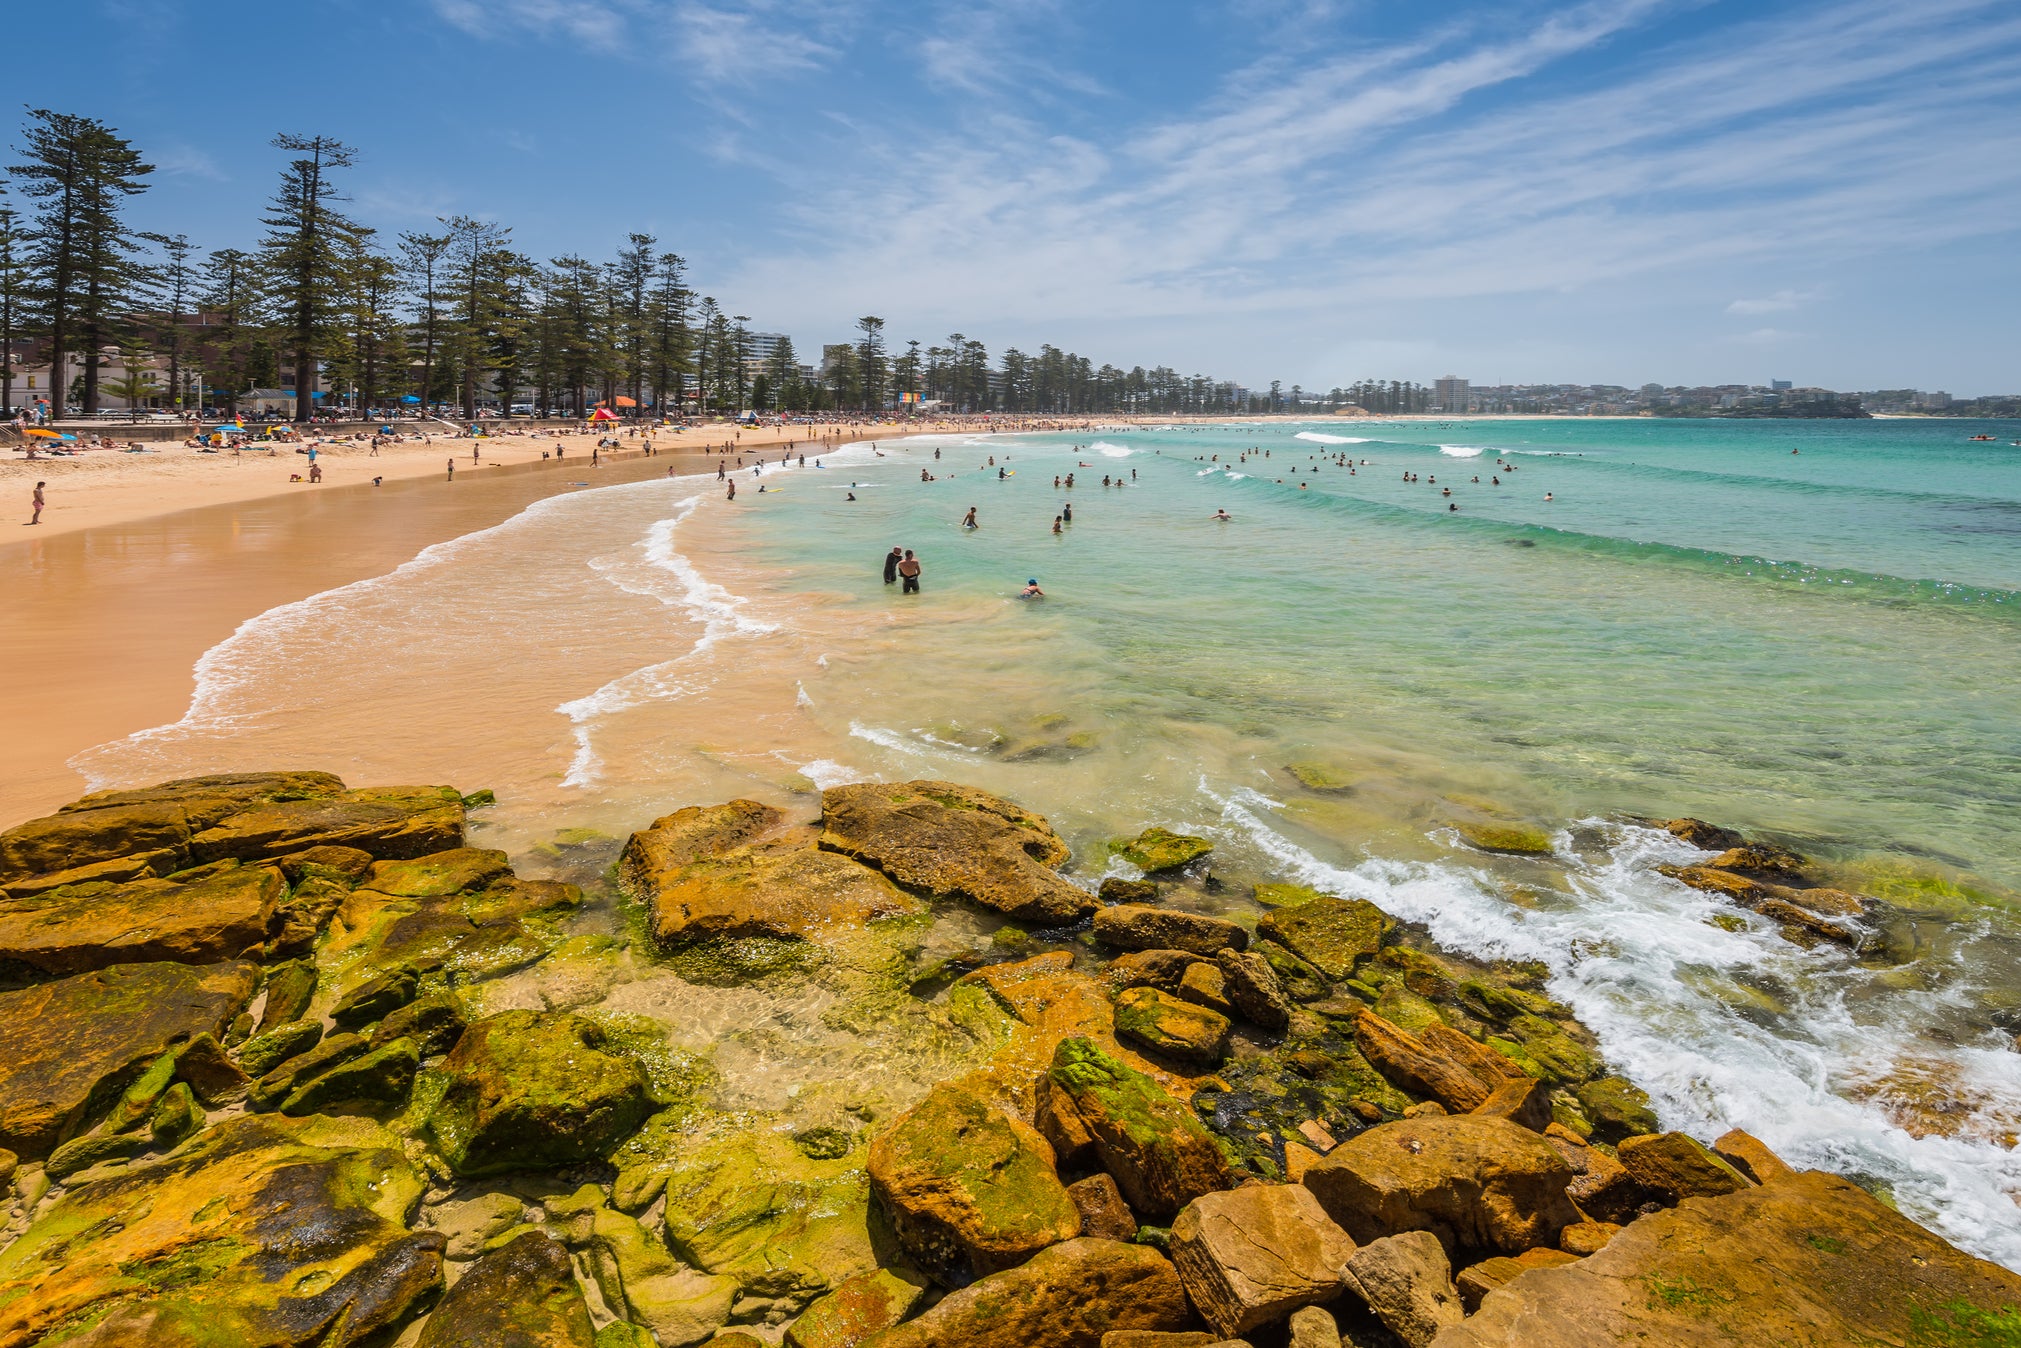 Surfers and sand-dwellers are welcome on Manly beach